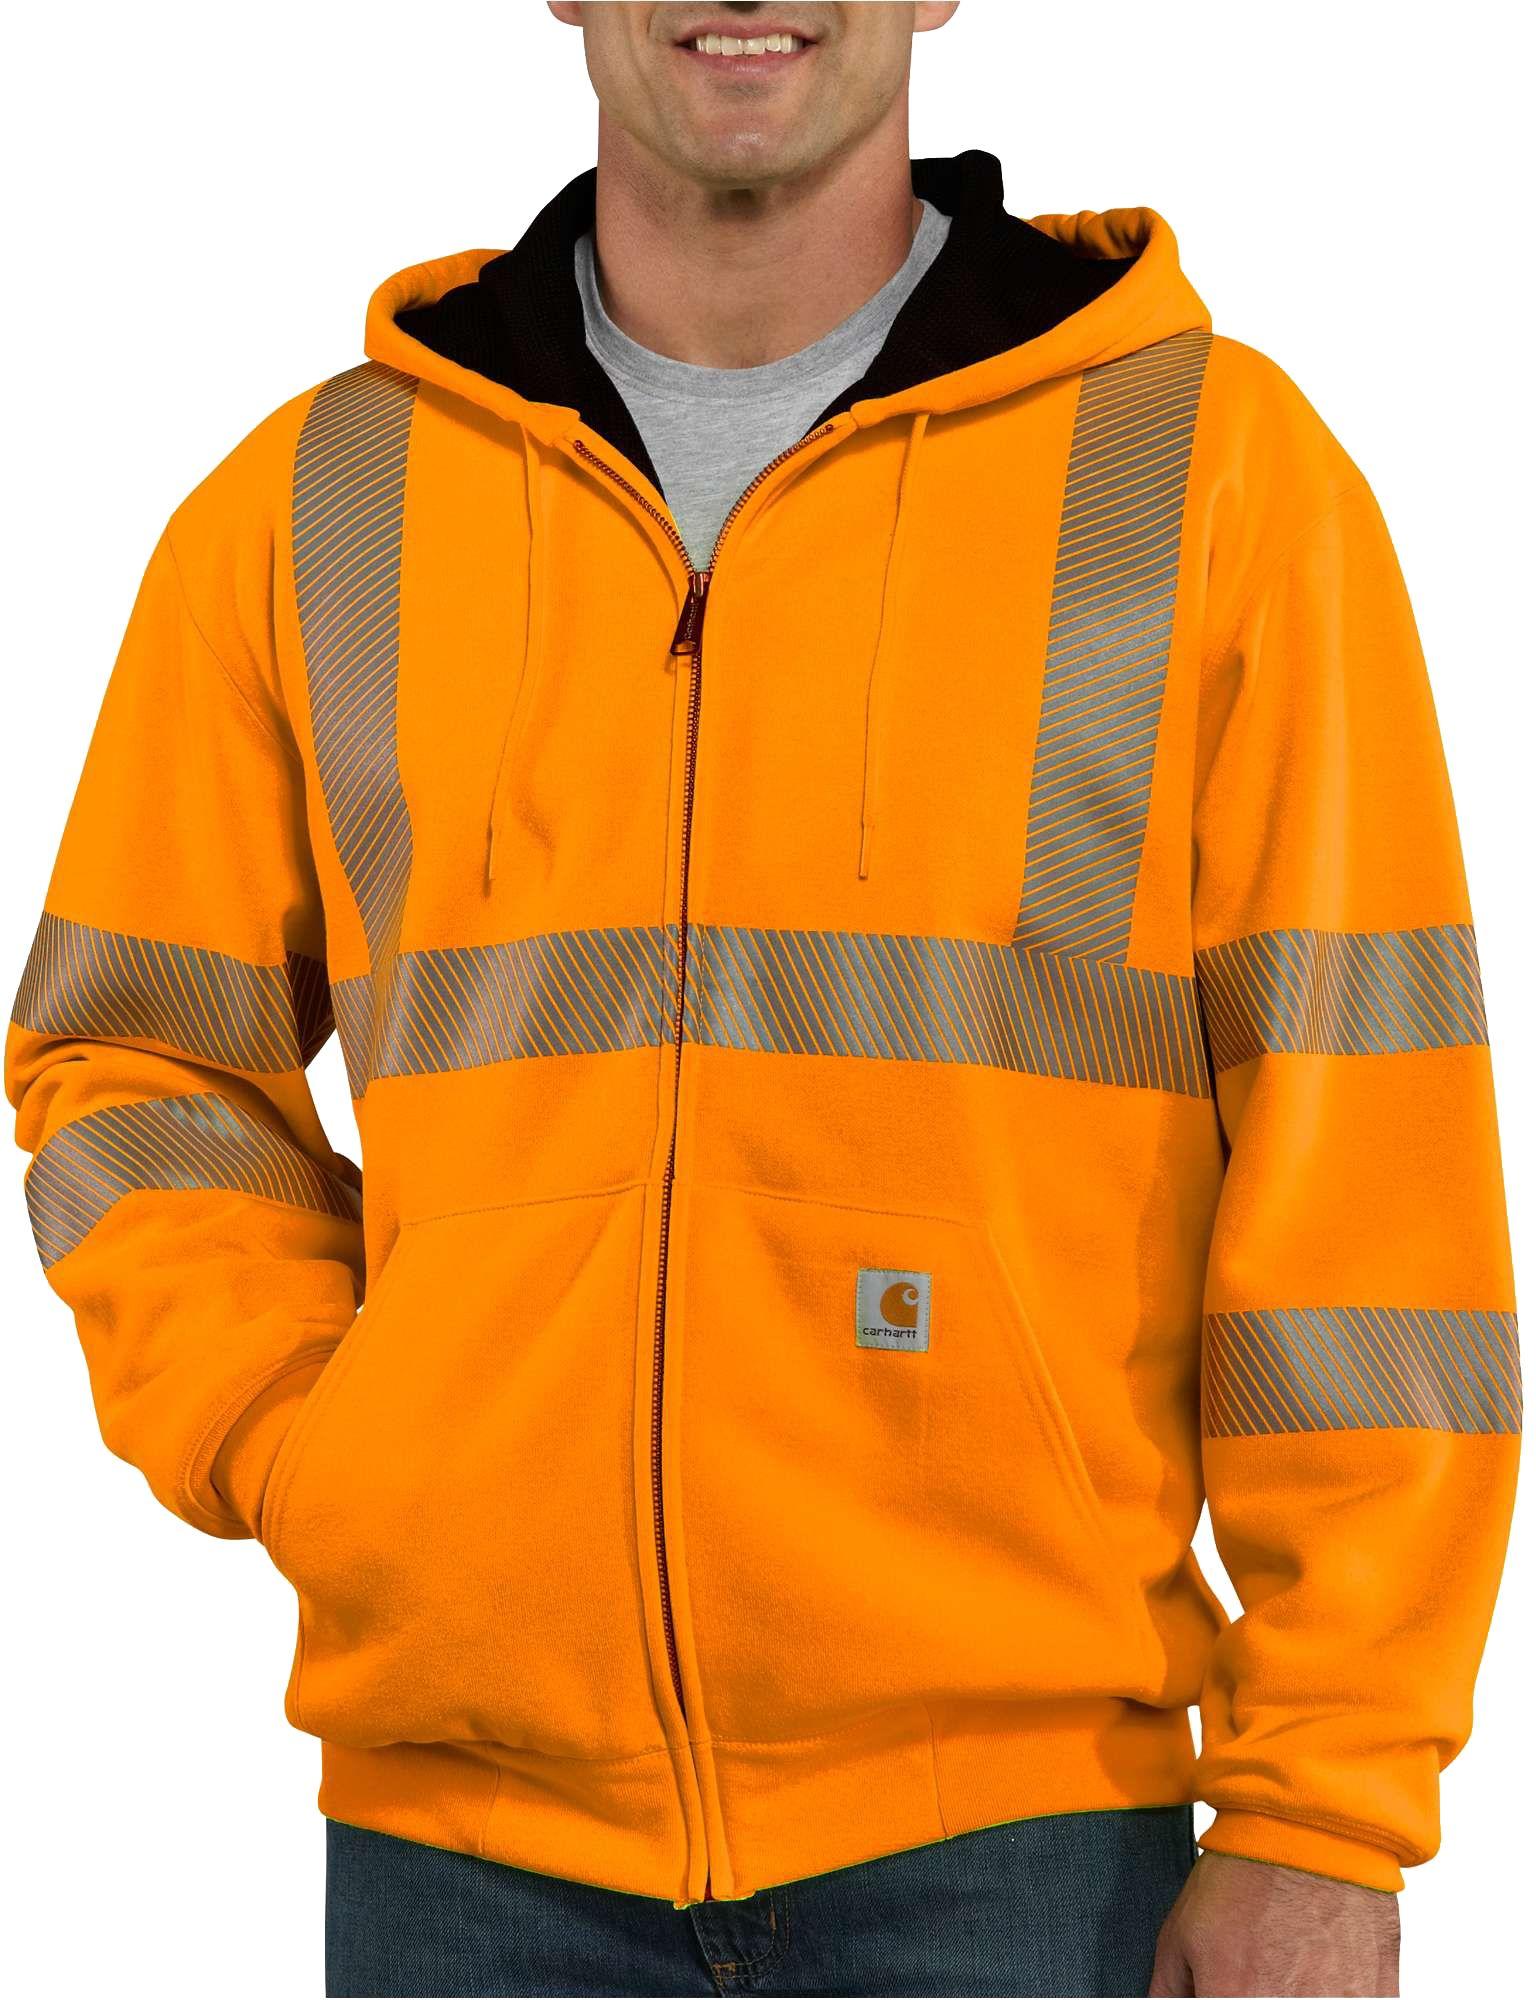 Carhartt Synthetic High Visibility Zip-up Class 3 Thermal Lined Hoodie ...